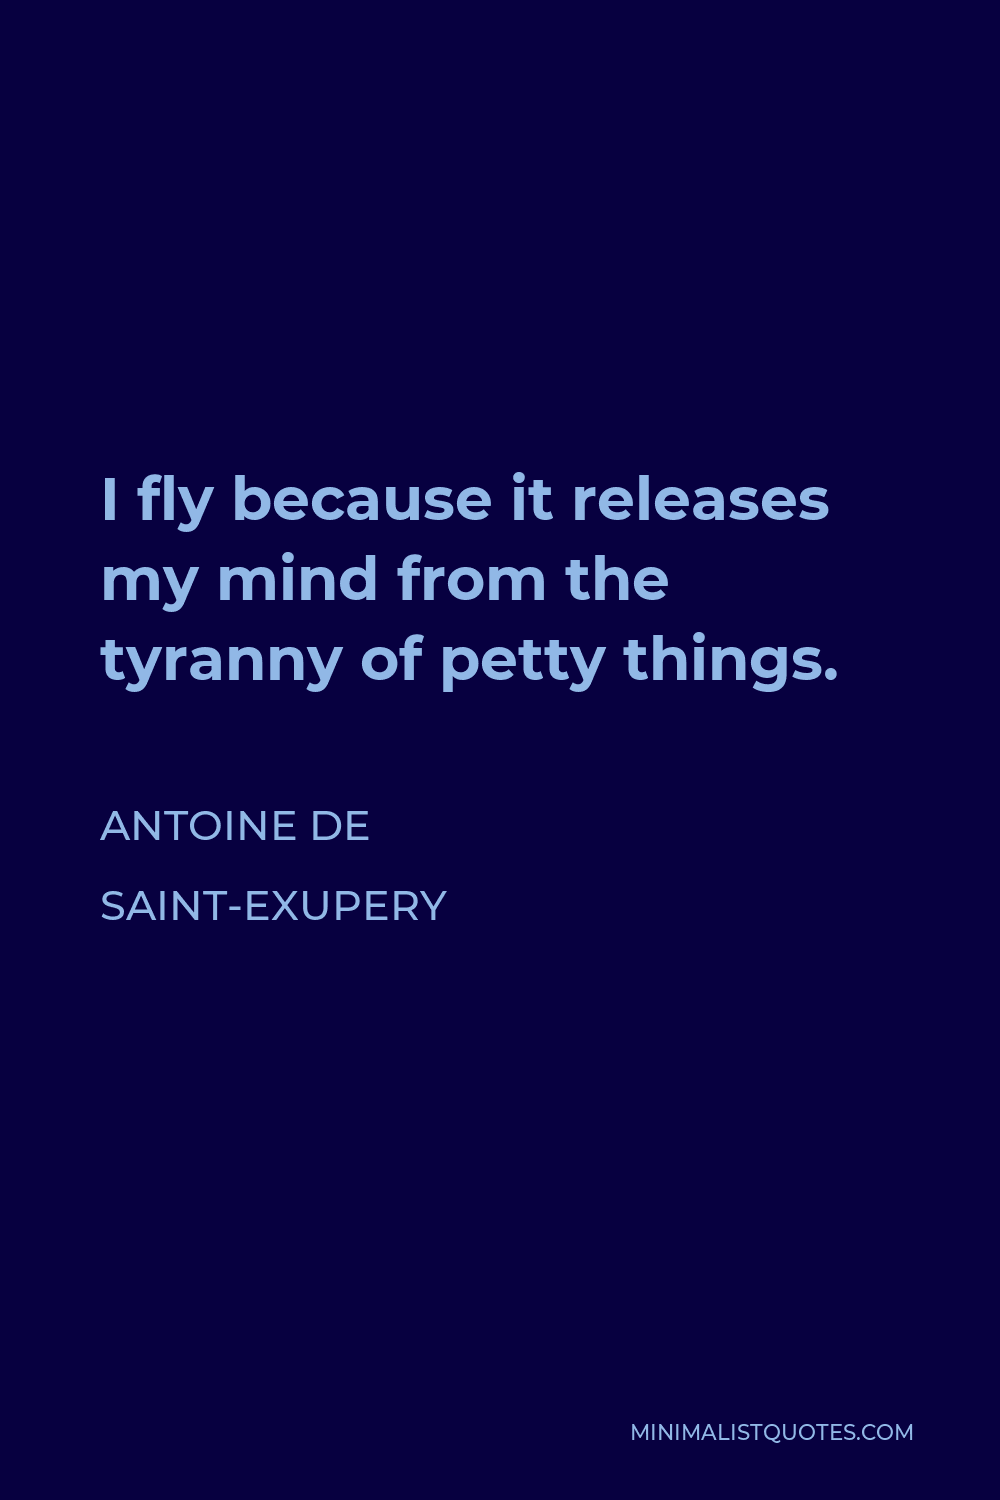 Antoine de Saint-Exupery Quote - I fly because it releases my mind from the tyranny of petty things.